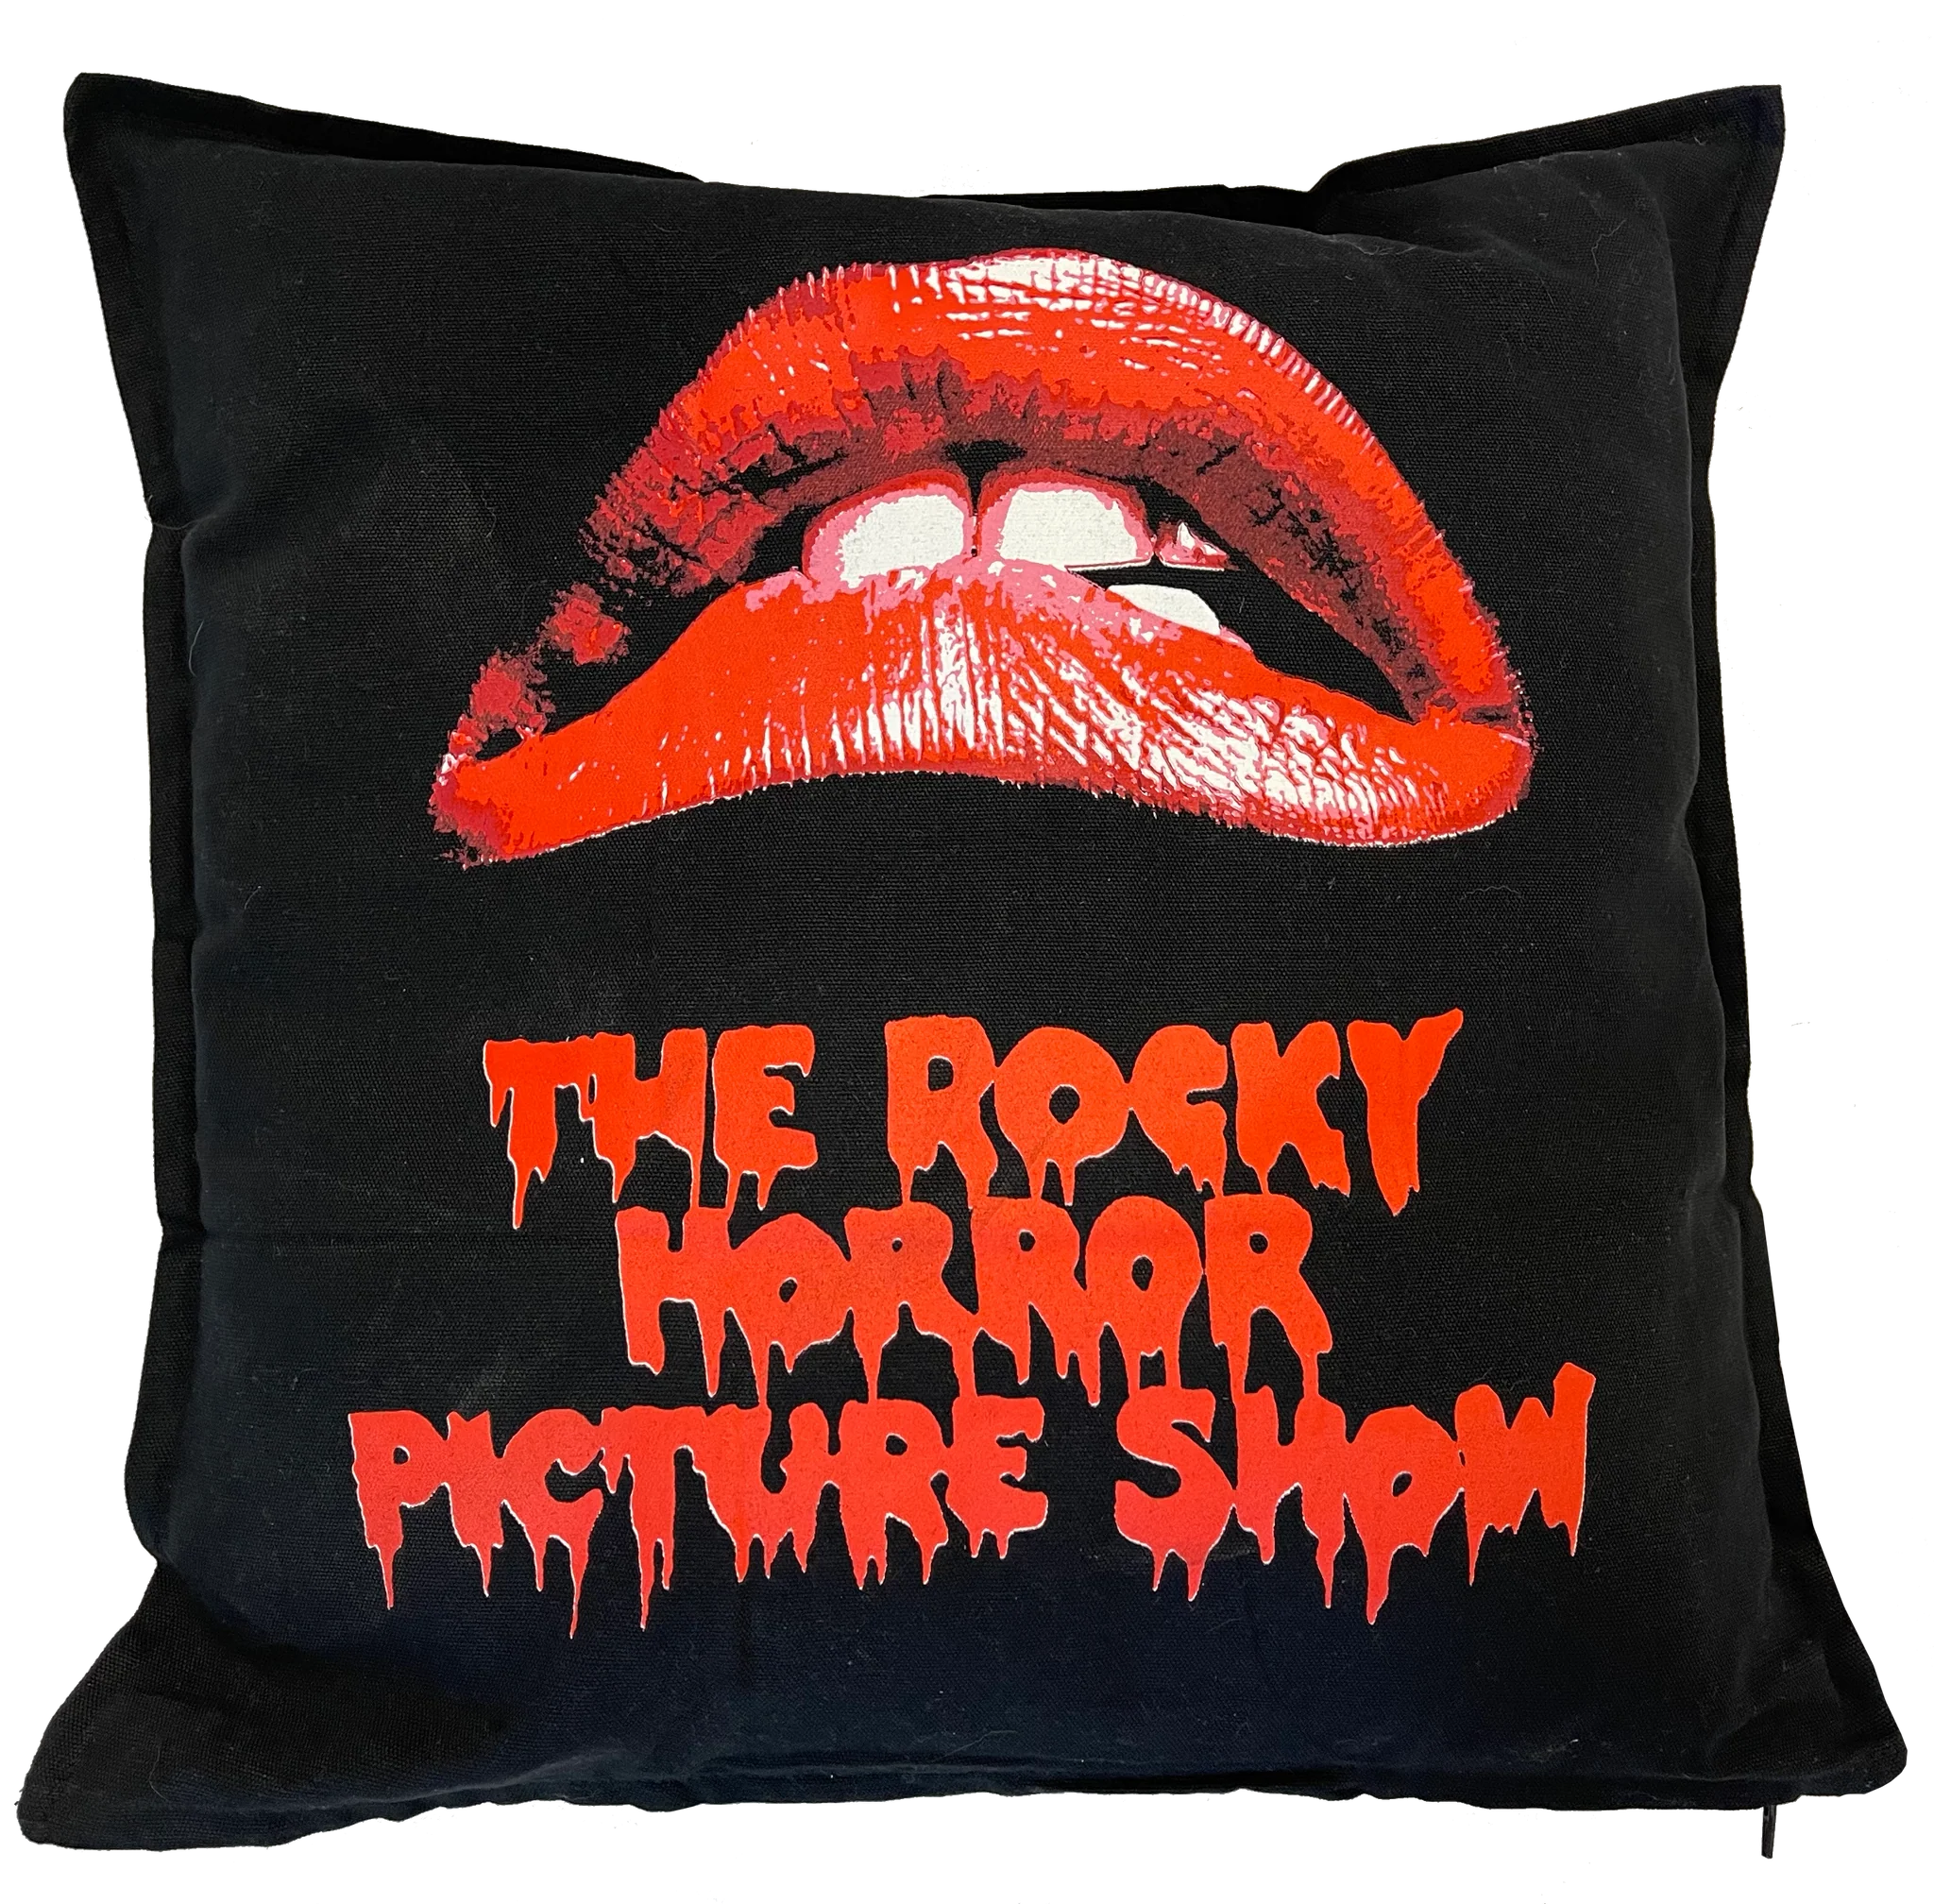 square shaped black cotton pillow with a print of Patricia Quinn's iconic red lips from The Rocky Horror Picture Show